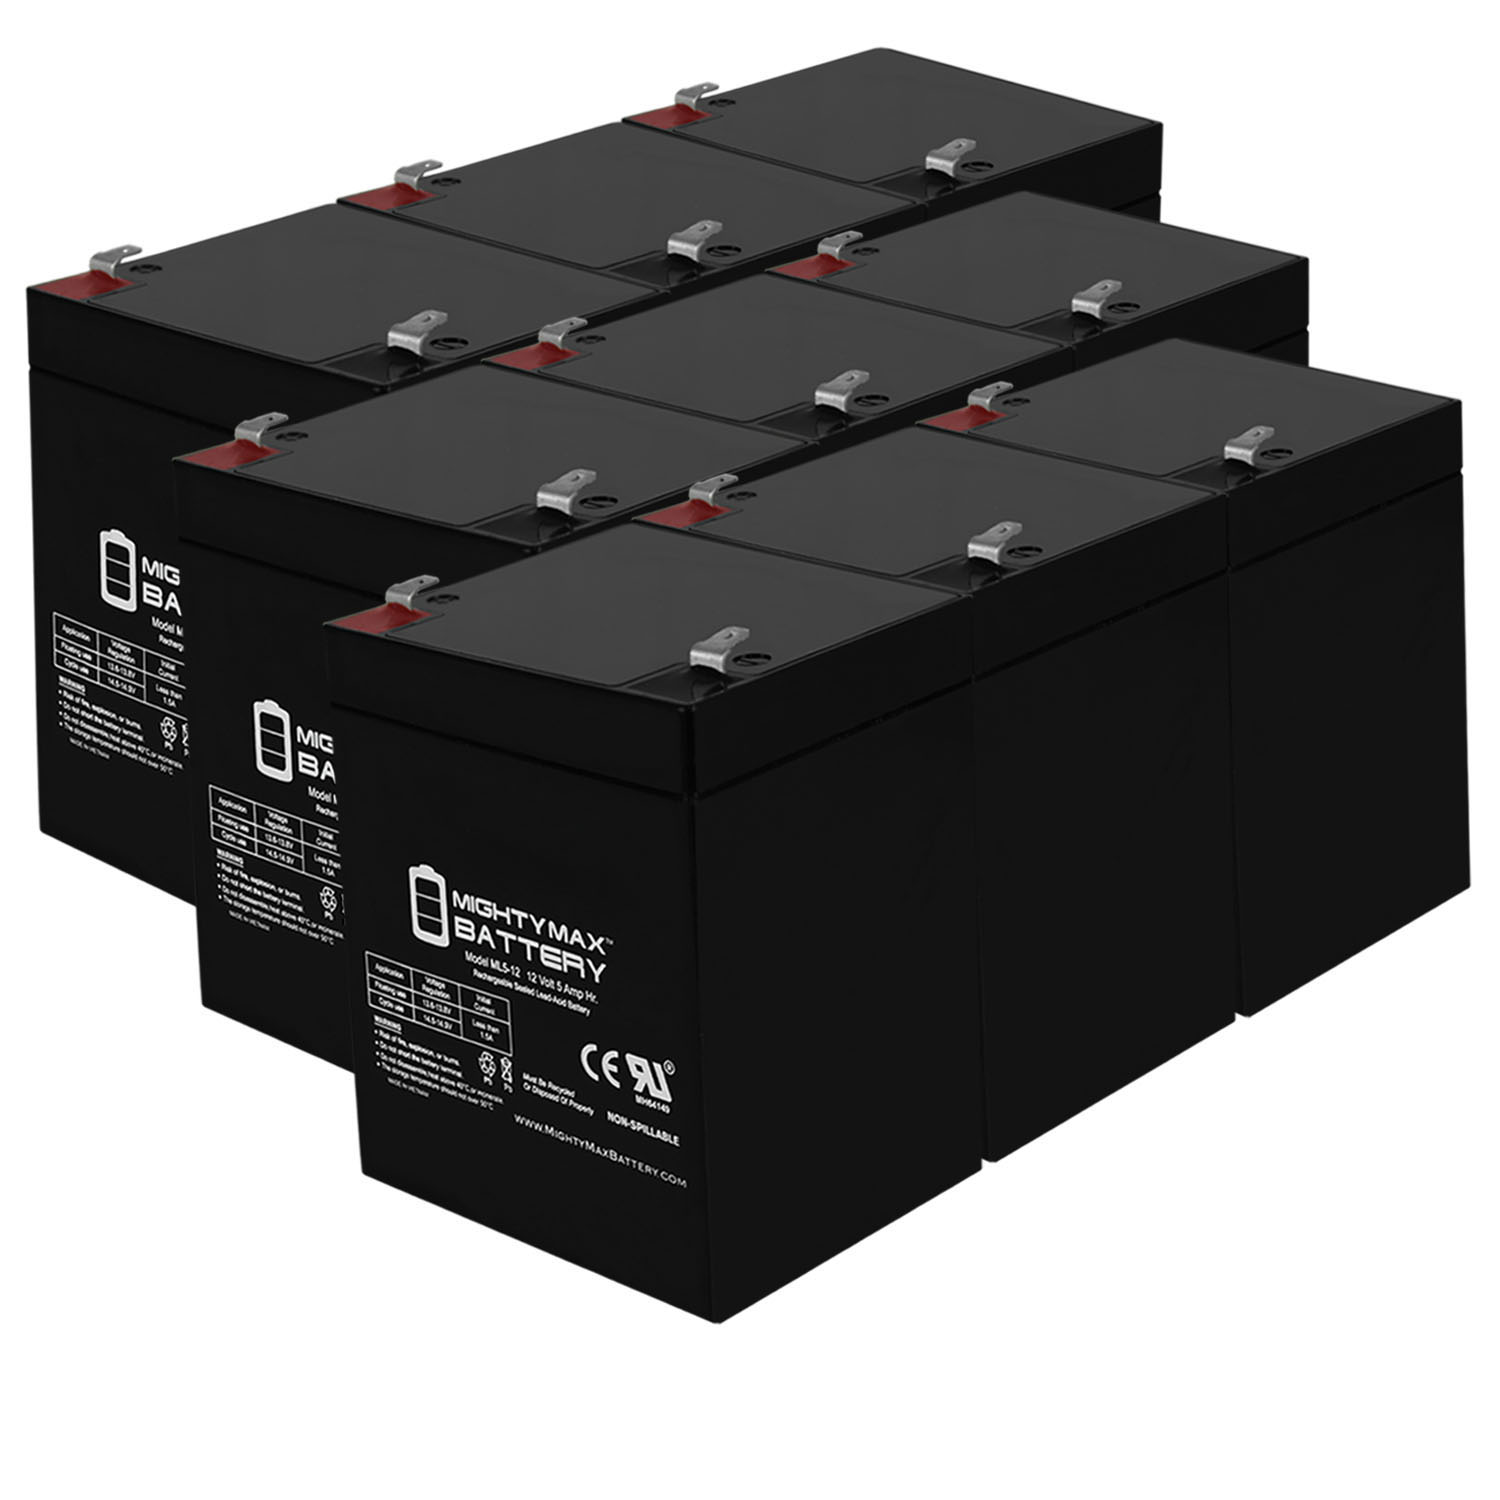 12V 5AH SLA Replacement Battery for CPS5.5-12 - 9 Pack